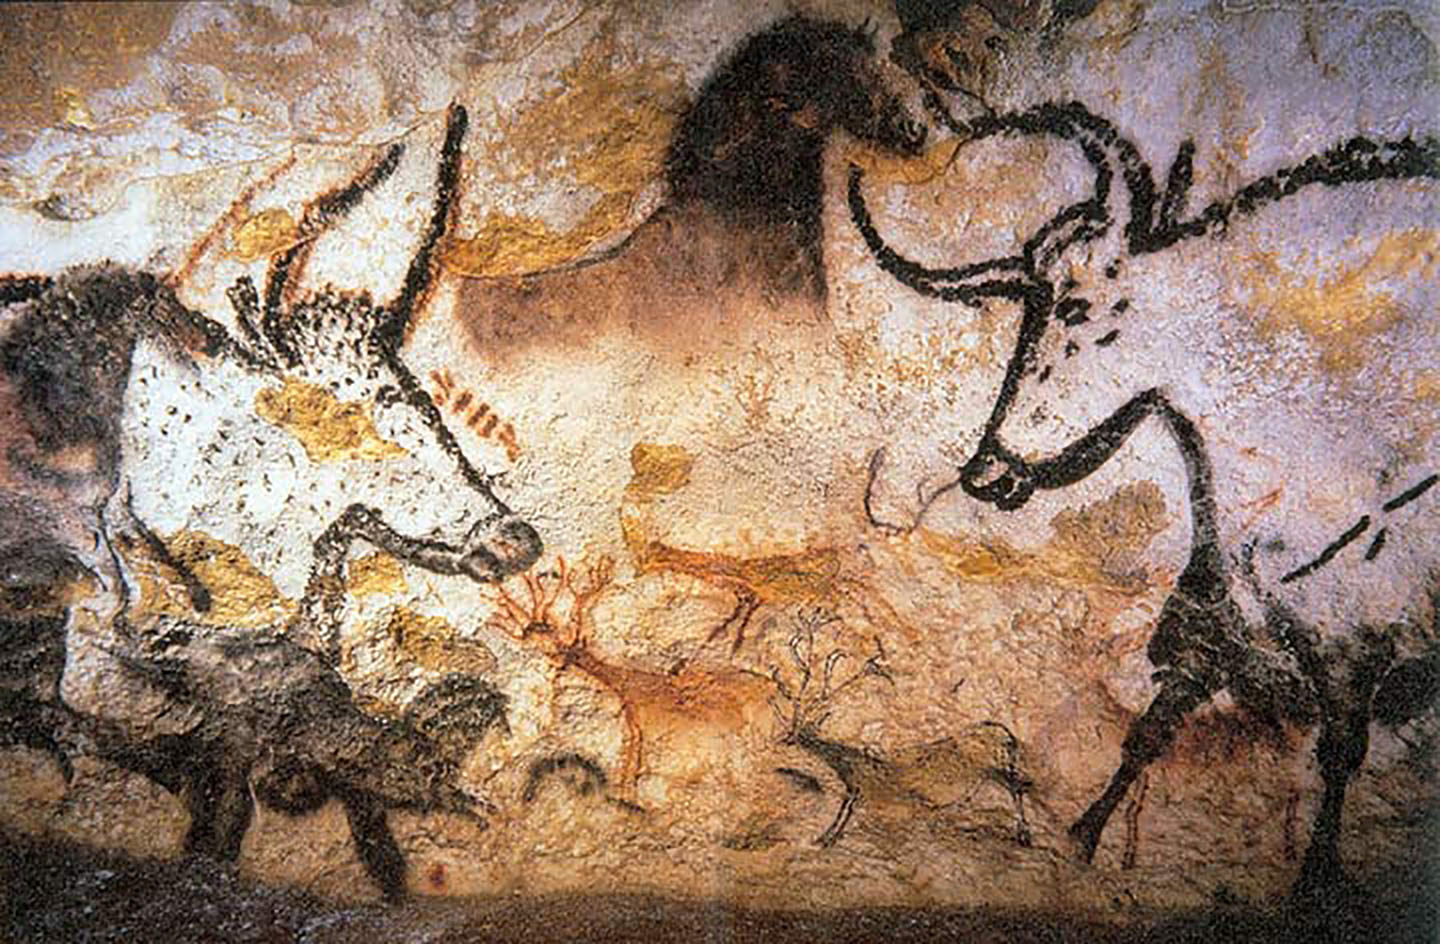 Cave paintings from Lascaux caves, circa 15,000BC.